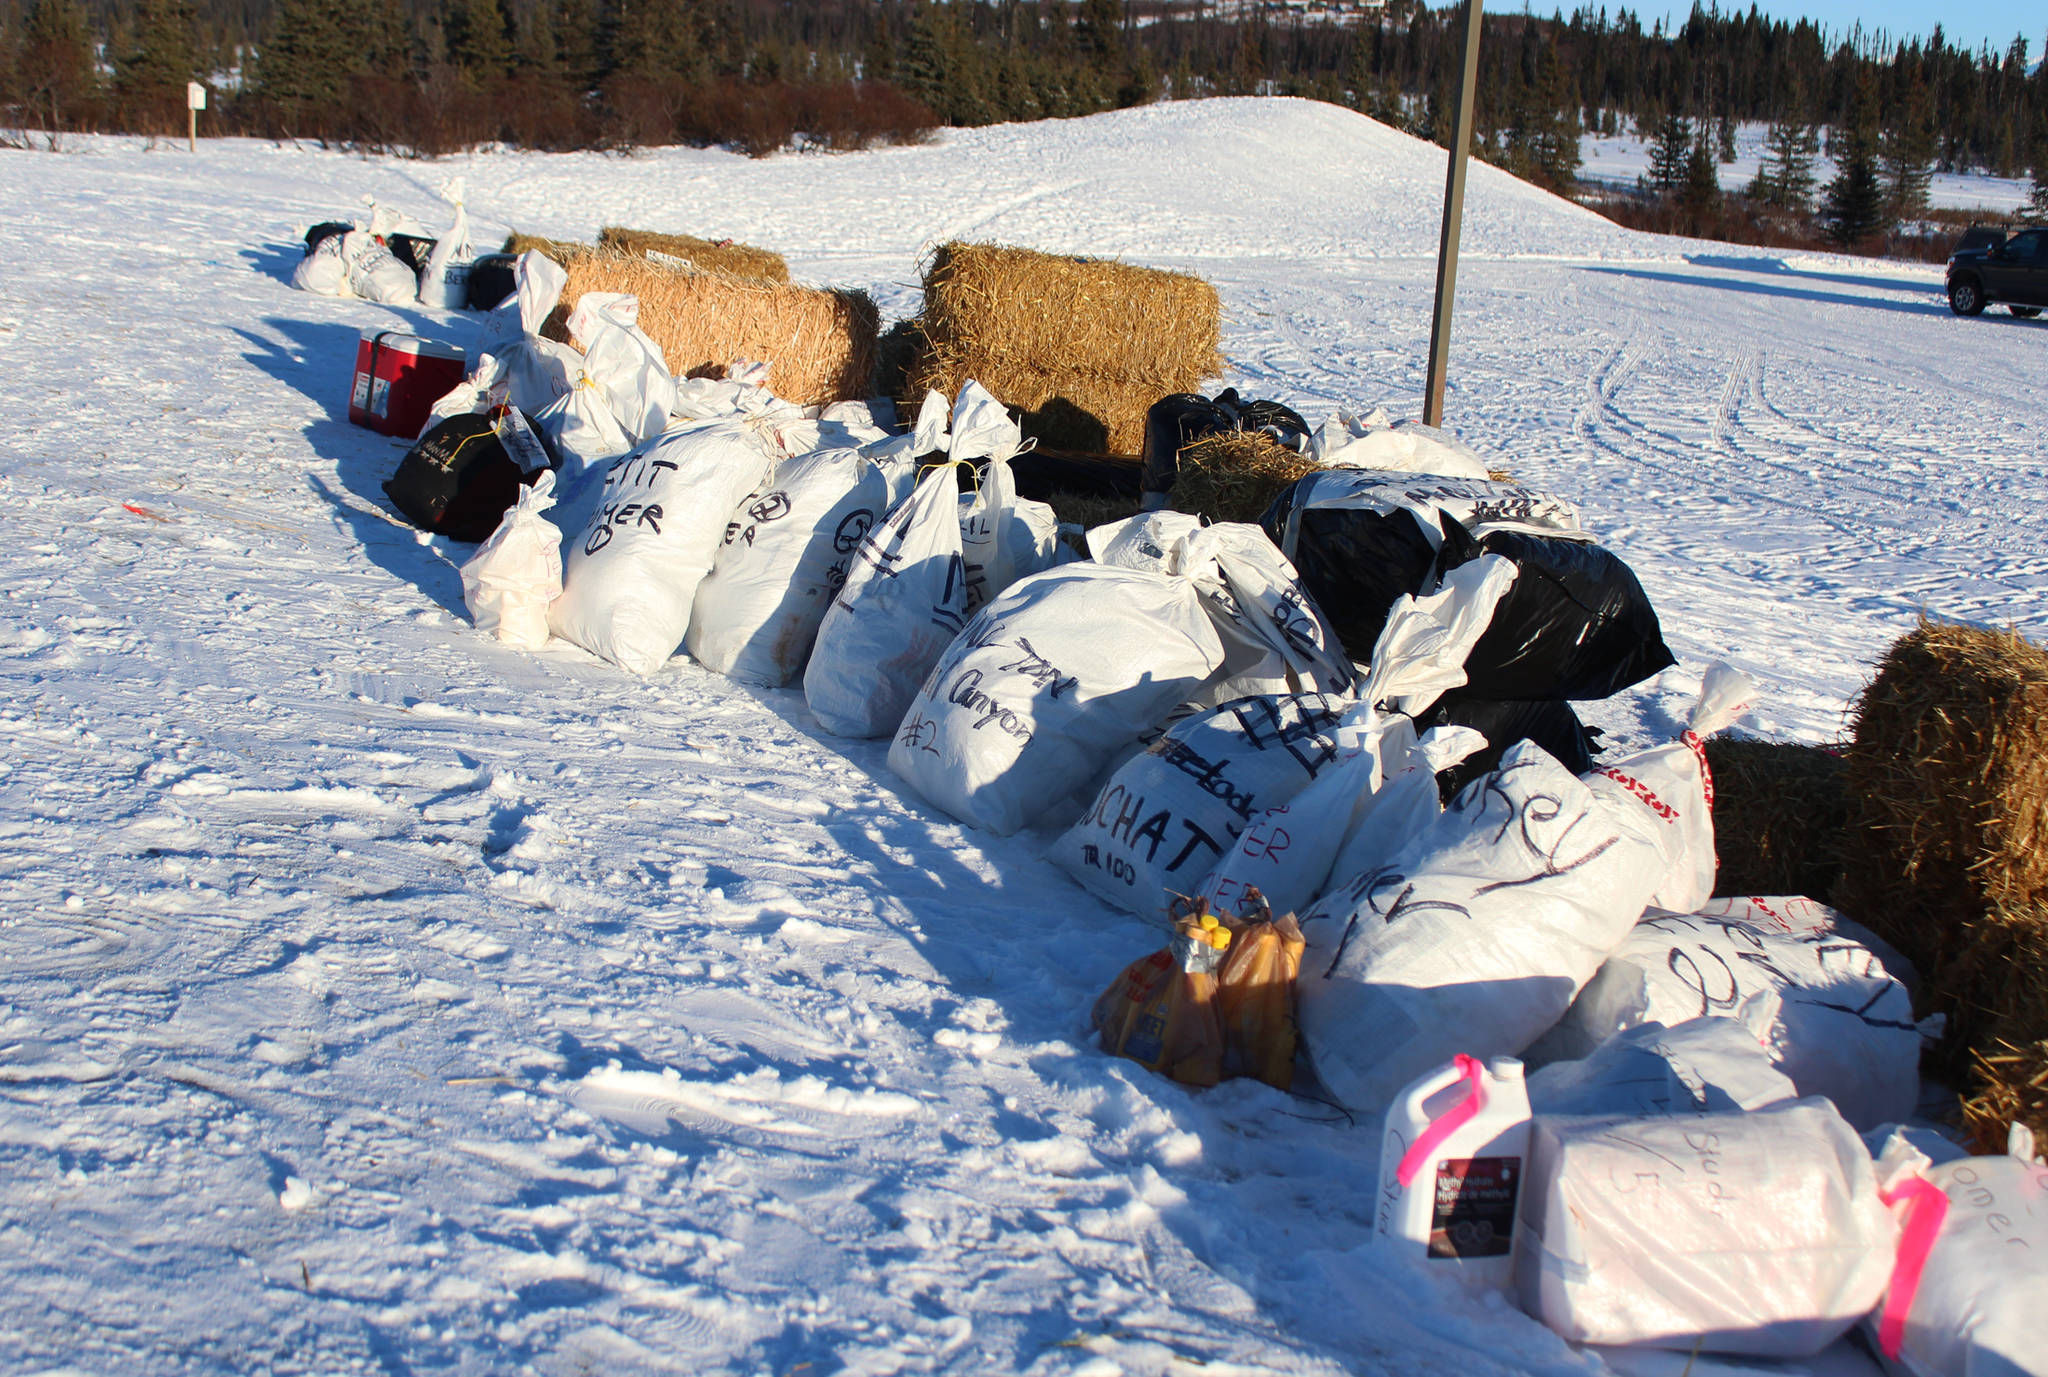 Bags of supplies and bales of hay await their corresponding mushing teams at a race checkpoint Saturday, Jan. 27, 2018 outside McNeil Canyon Elementary School near Homer, Alaska. (Photo by Megan Pacer/Homer News)